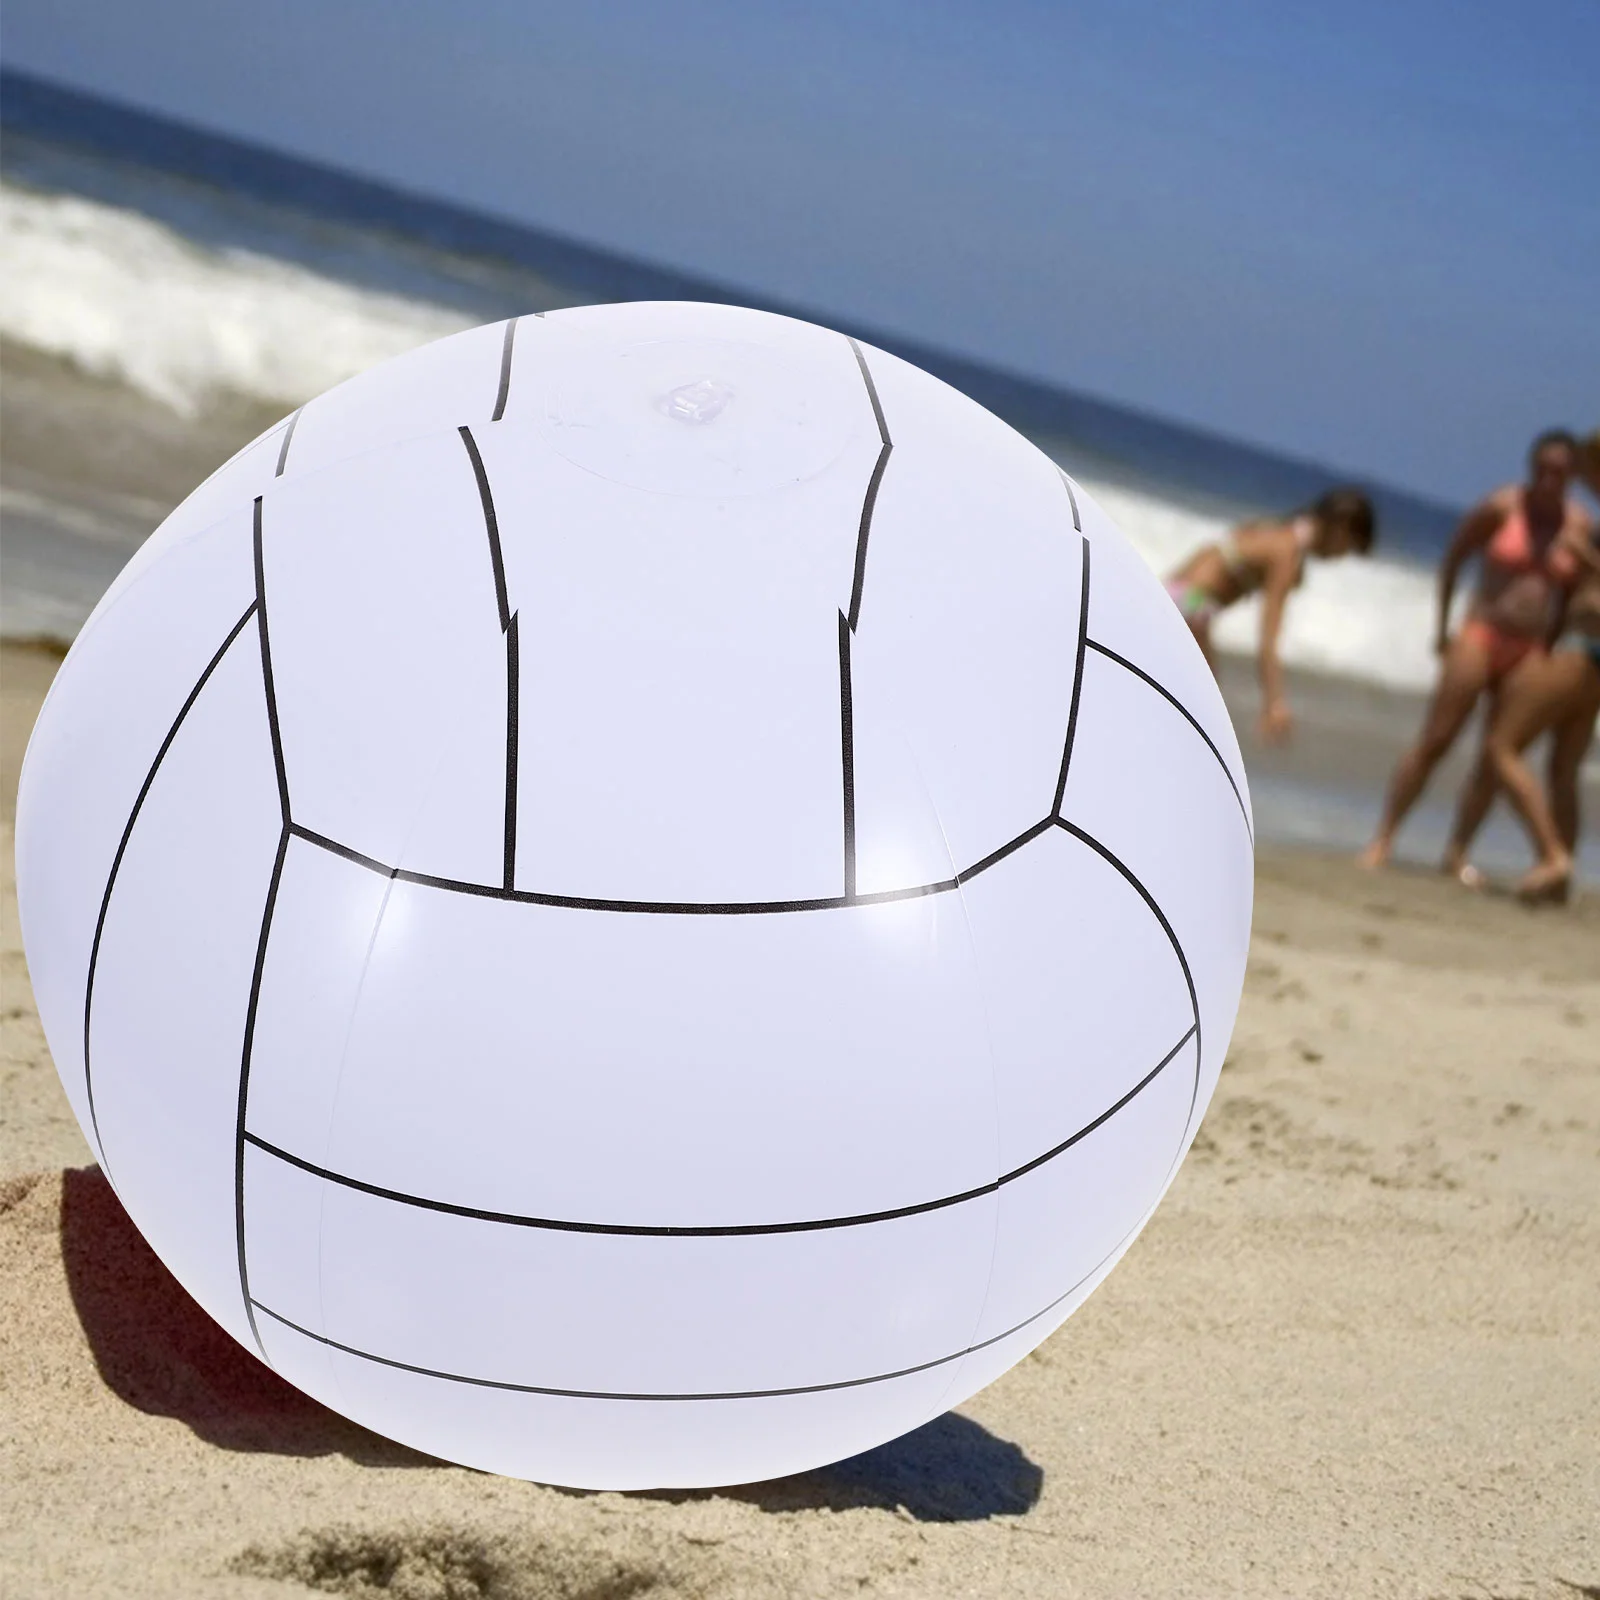 

Inflatable Beach Ball Volleyball Balls Pool Toys Playing Sports Party Decorations Swimming Outdoor Simulation